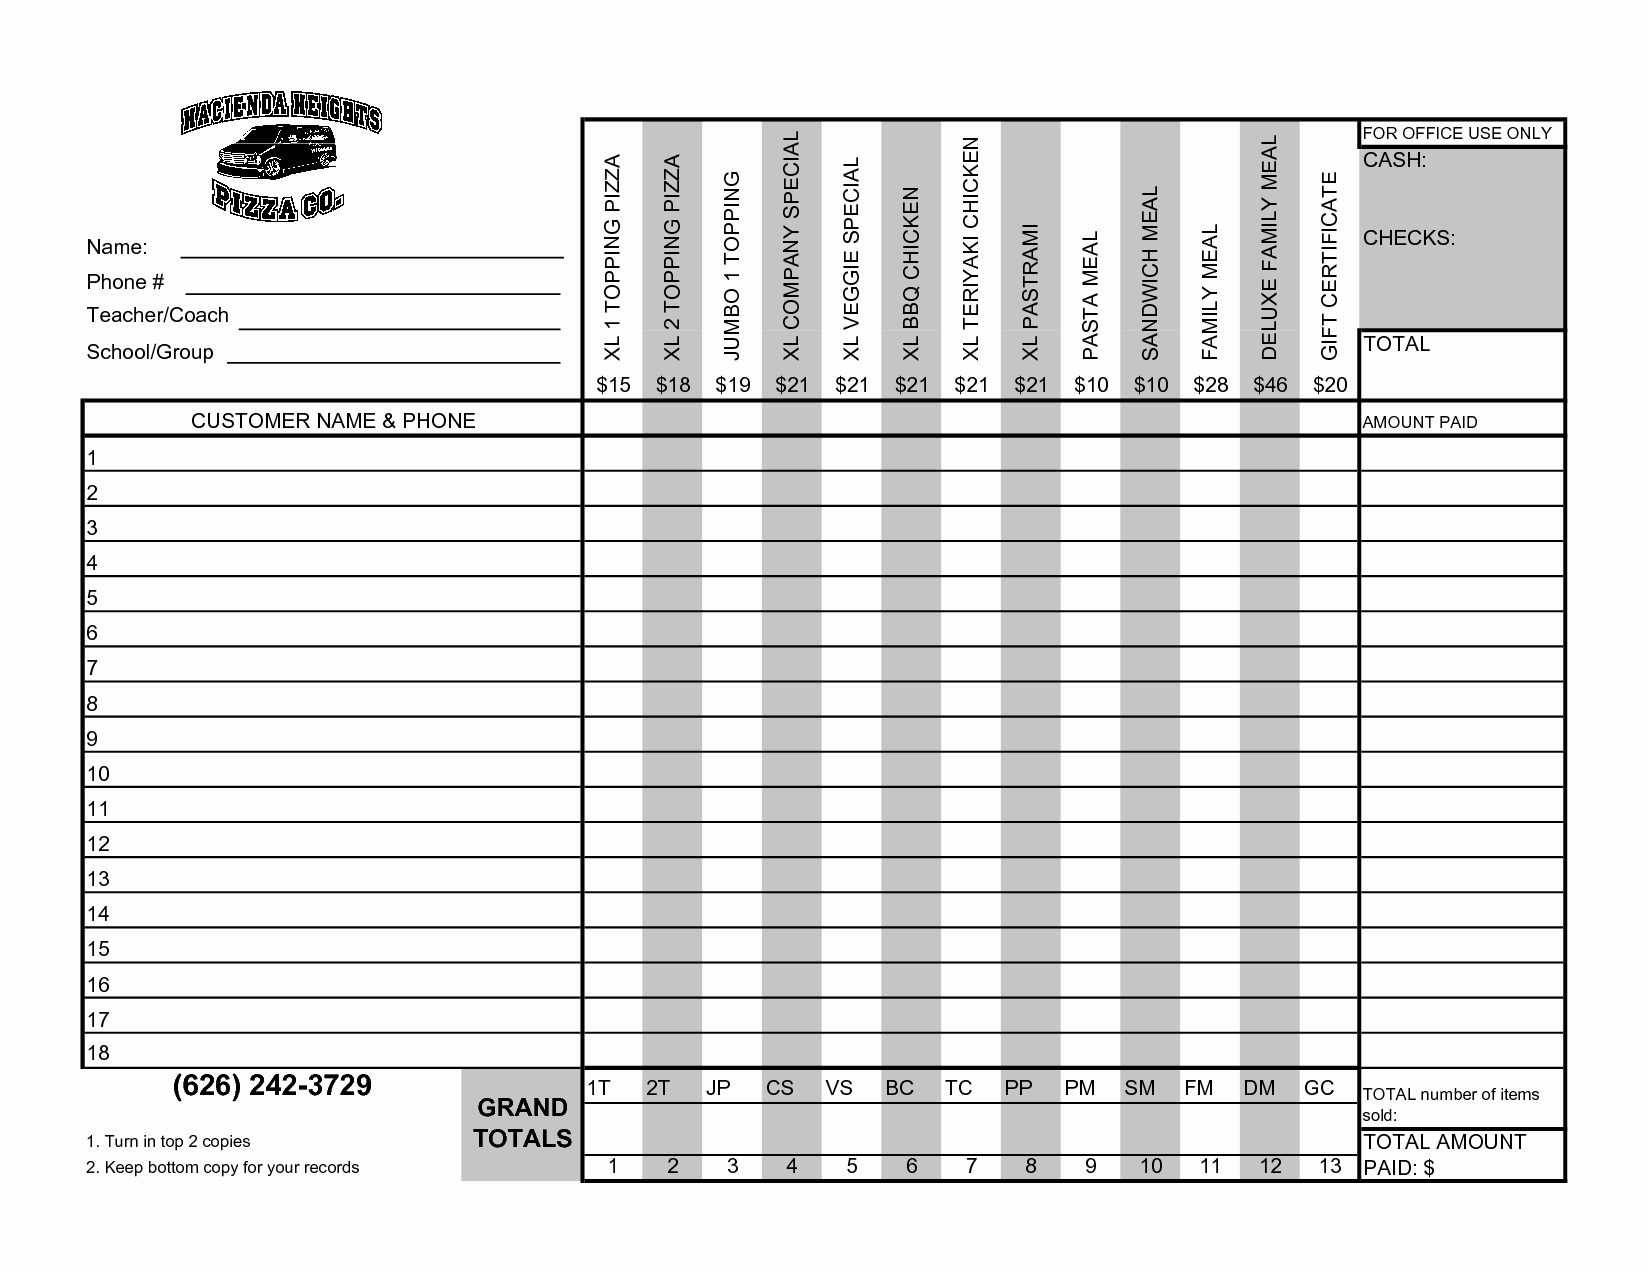 011 Fundraising Order Form Template Excel Impressive Ideas Within Blank Fundraiser Order Form Template